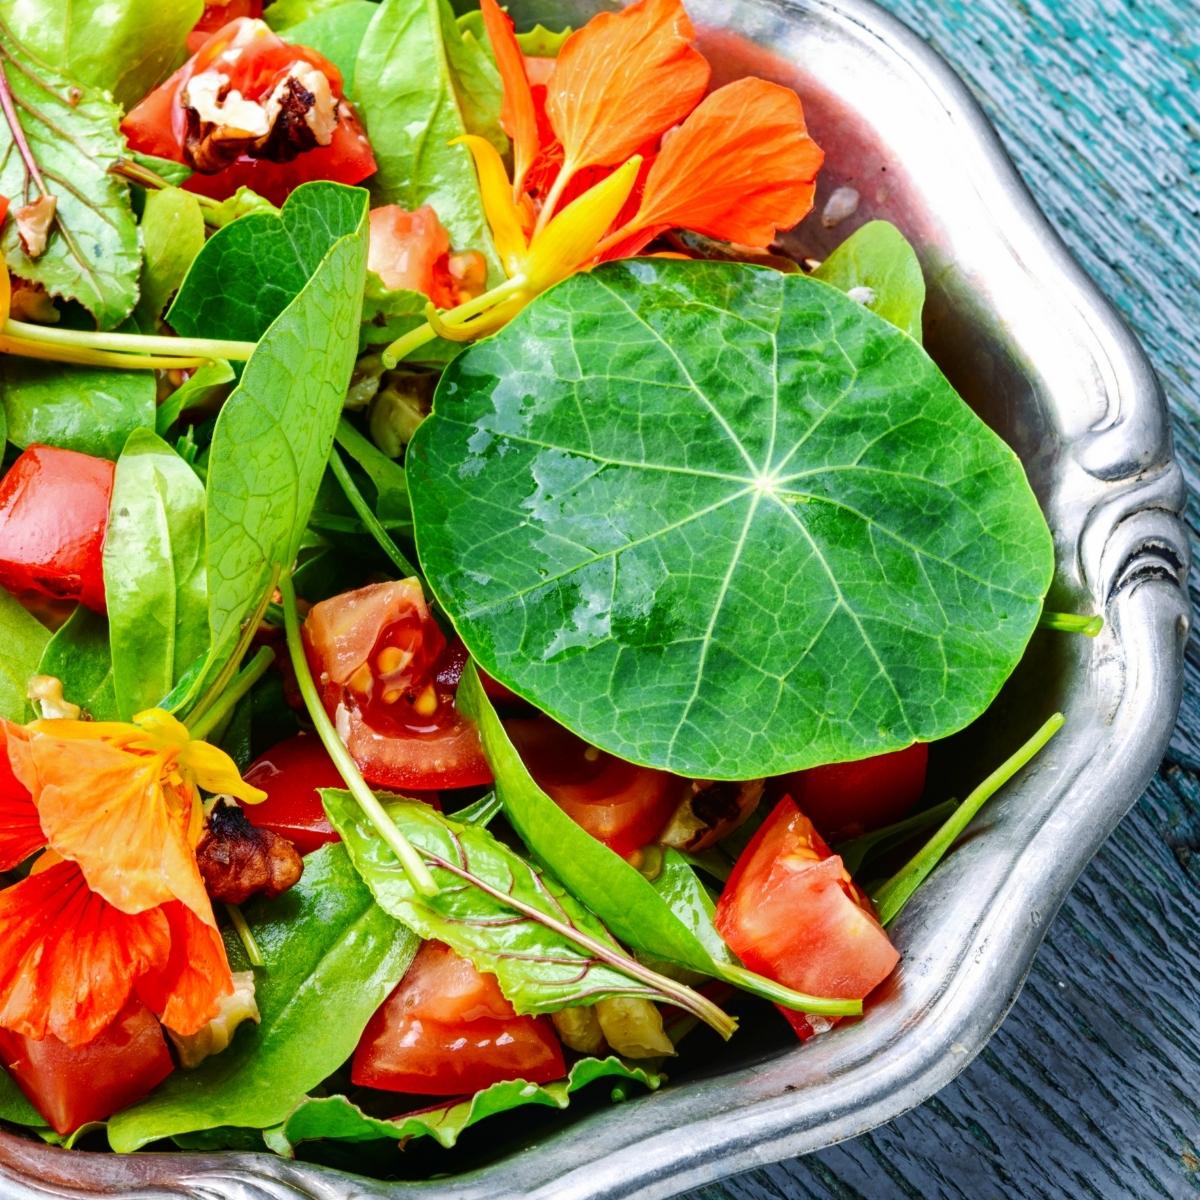 A salad of nasturtium leaves, flowers and tomatoes. It is emerald and orange.